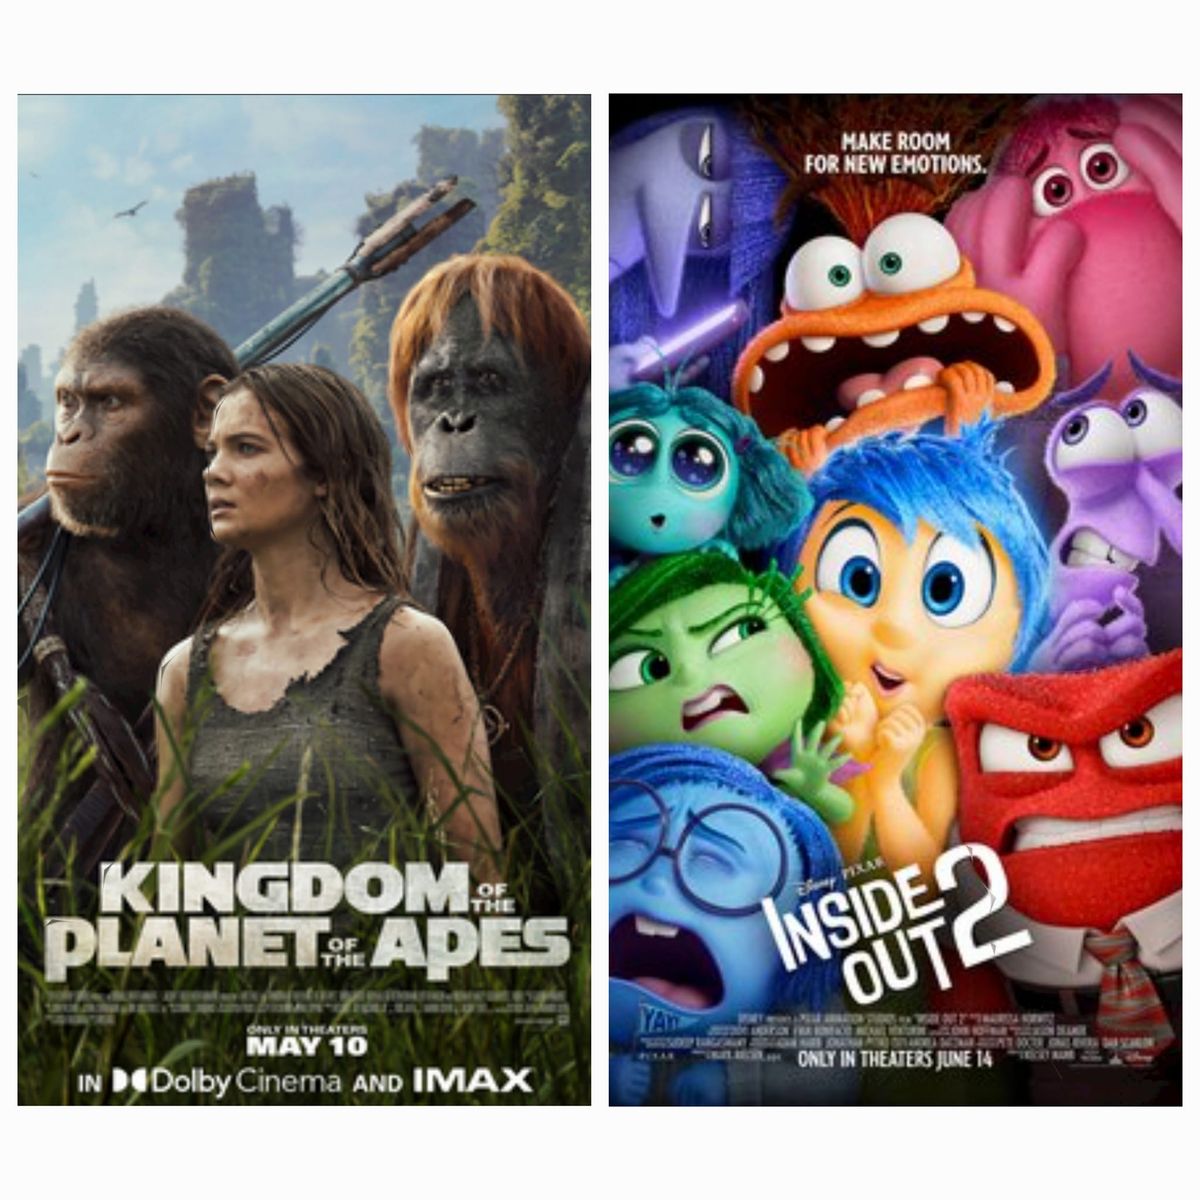 Double Feature of Kingdom of the Planet of the Apes & Inside Out 2